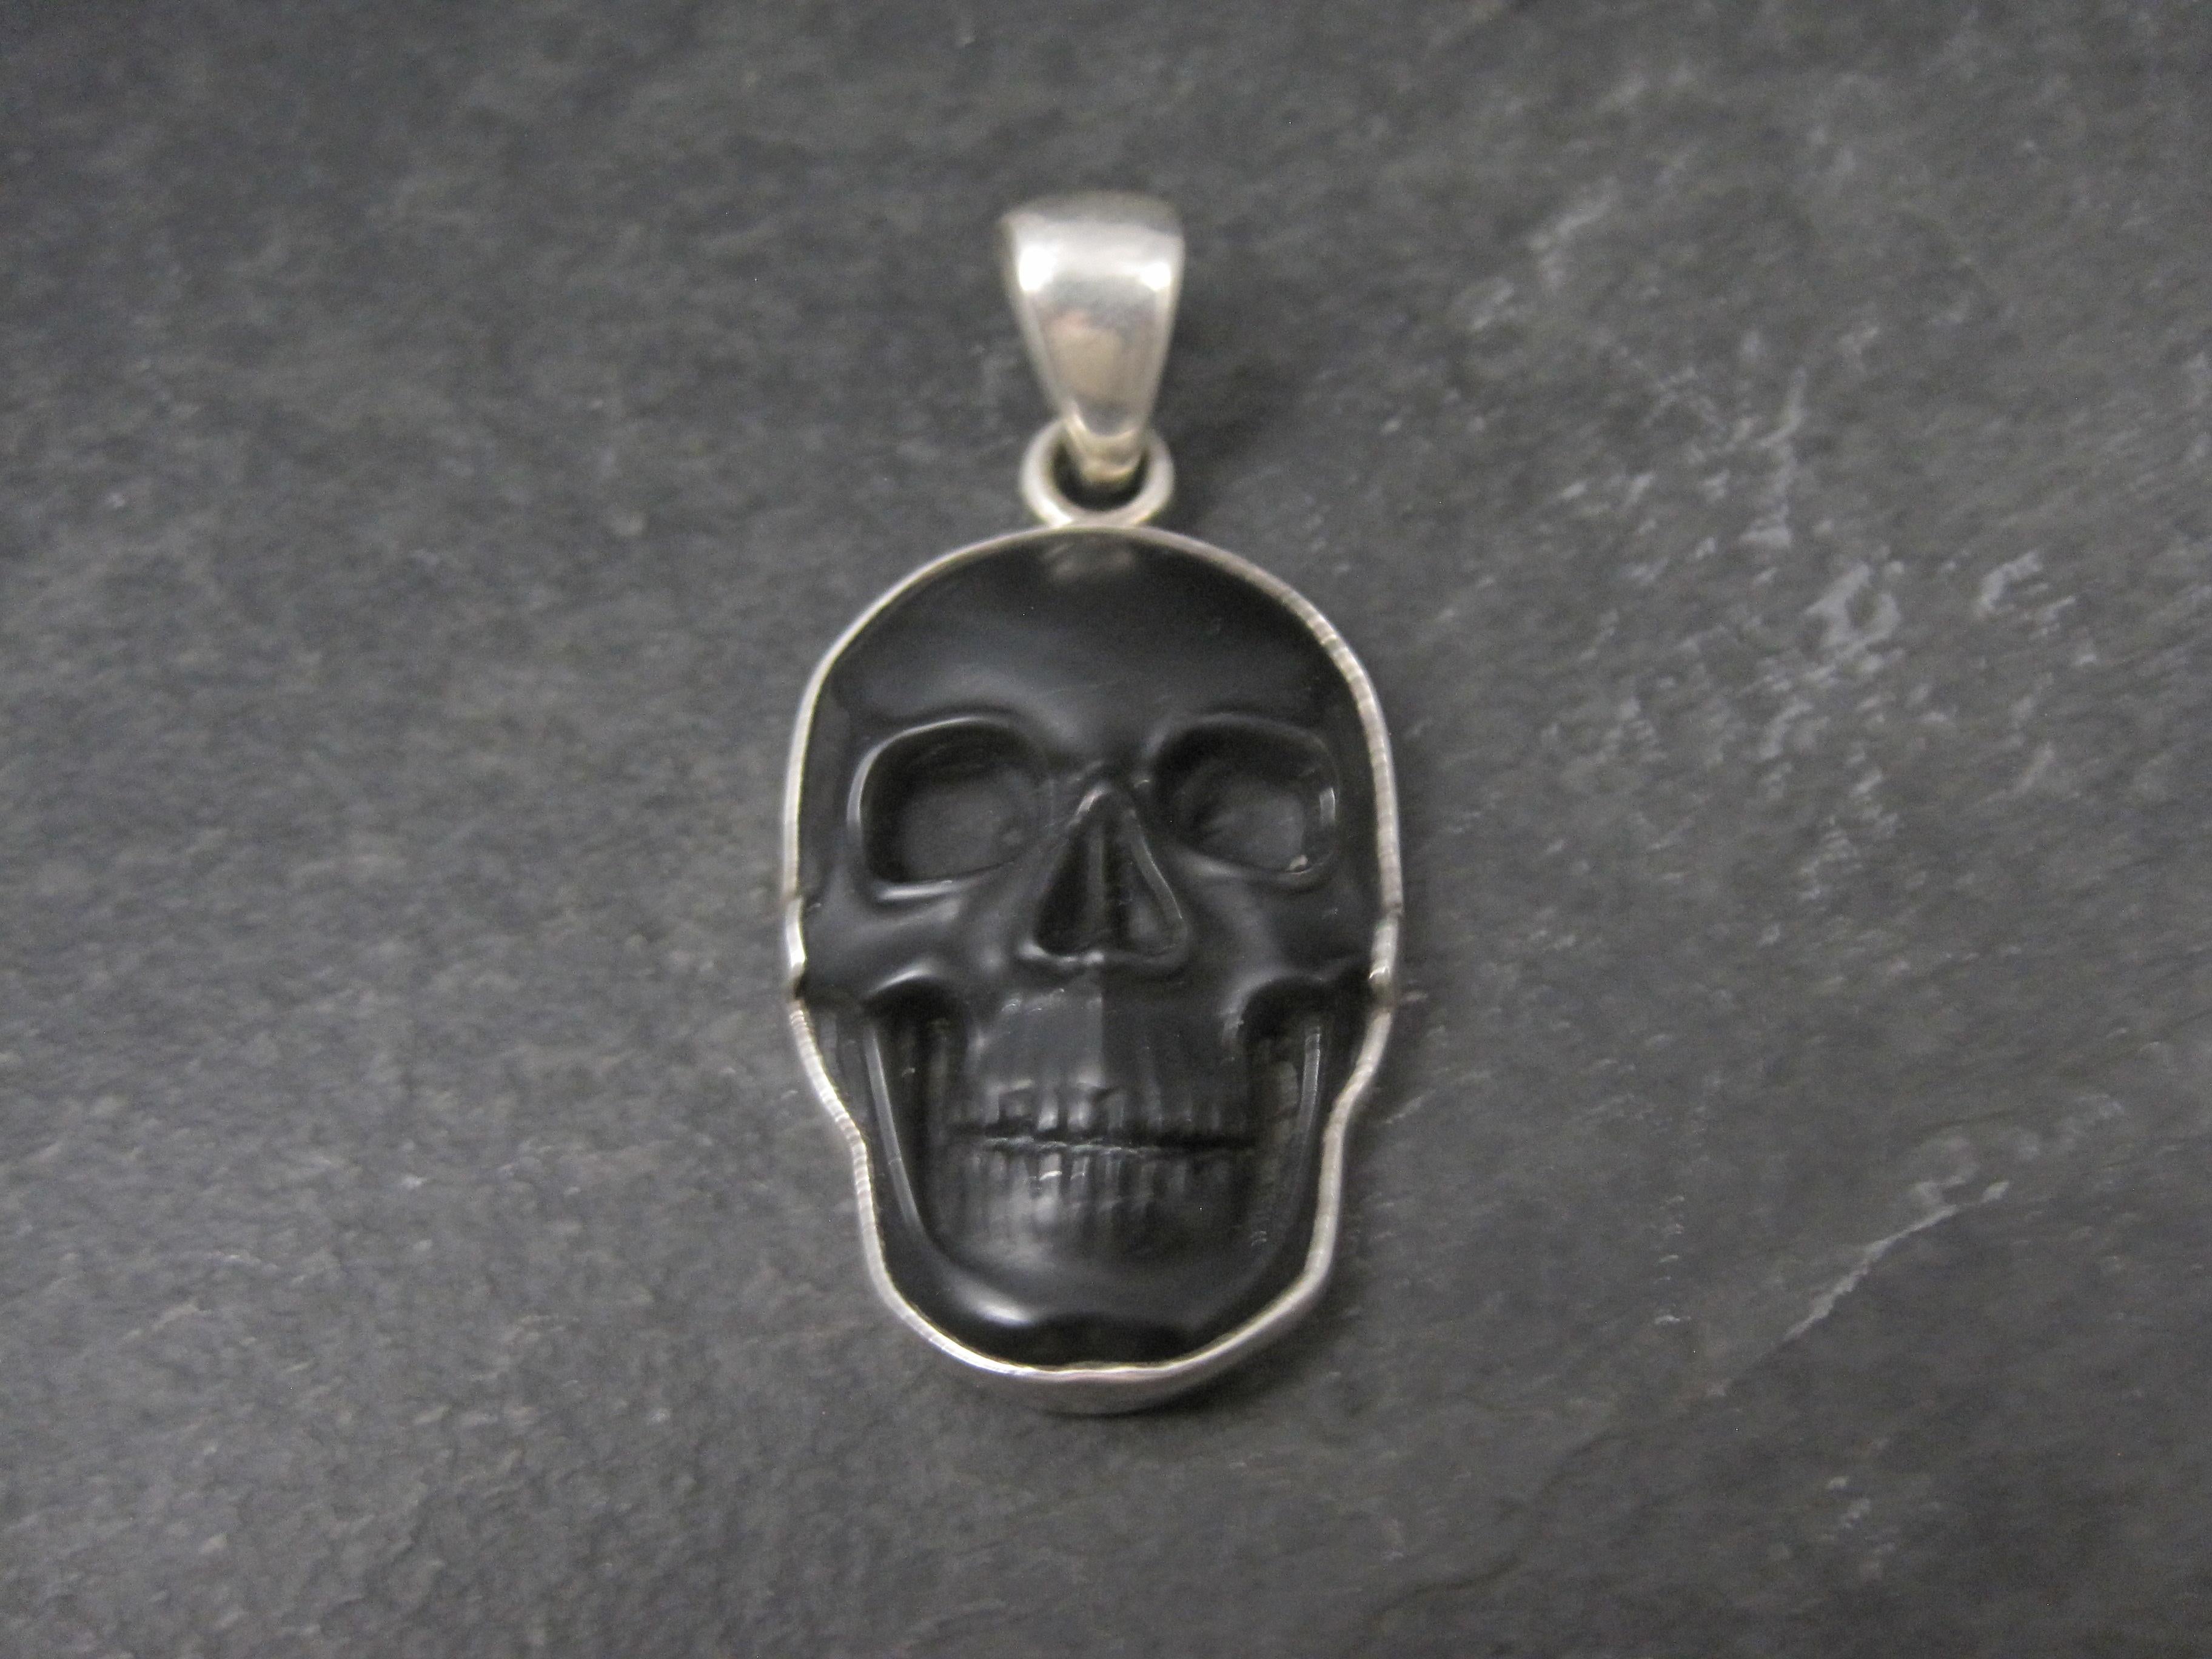 This gorgeous, sterling silver, hand-carved obsidian skull pendant is a creation of Charles Albert.

Measurements: 1 1/16 by 2 1/4 inches including bail
Bail will accommodate a chain up to 5mm wide

Condition: Excellent
